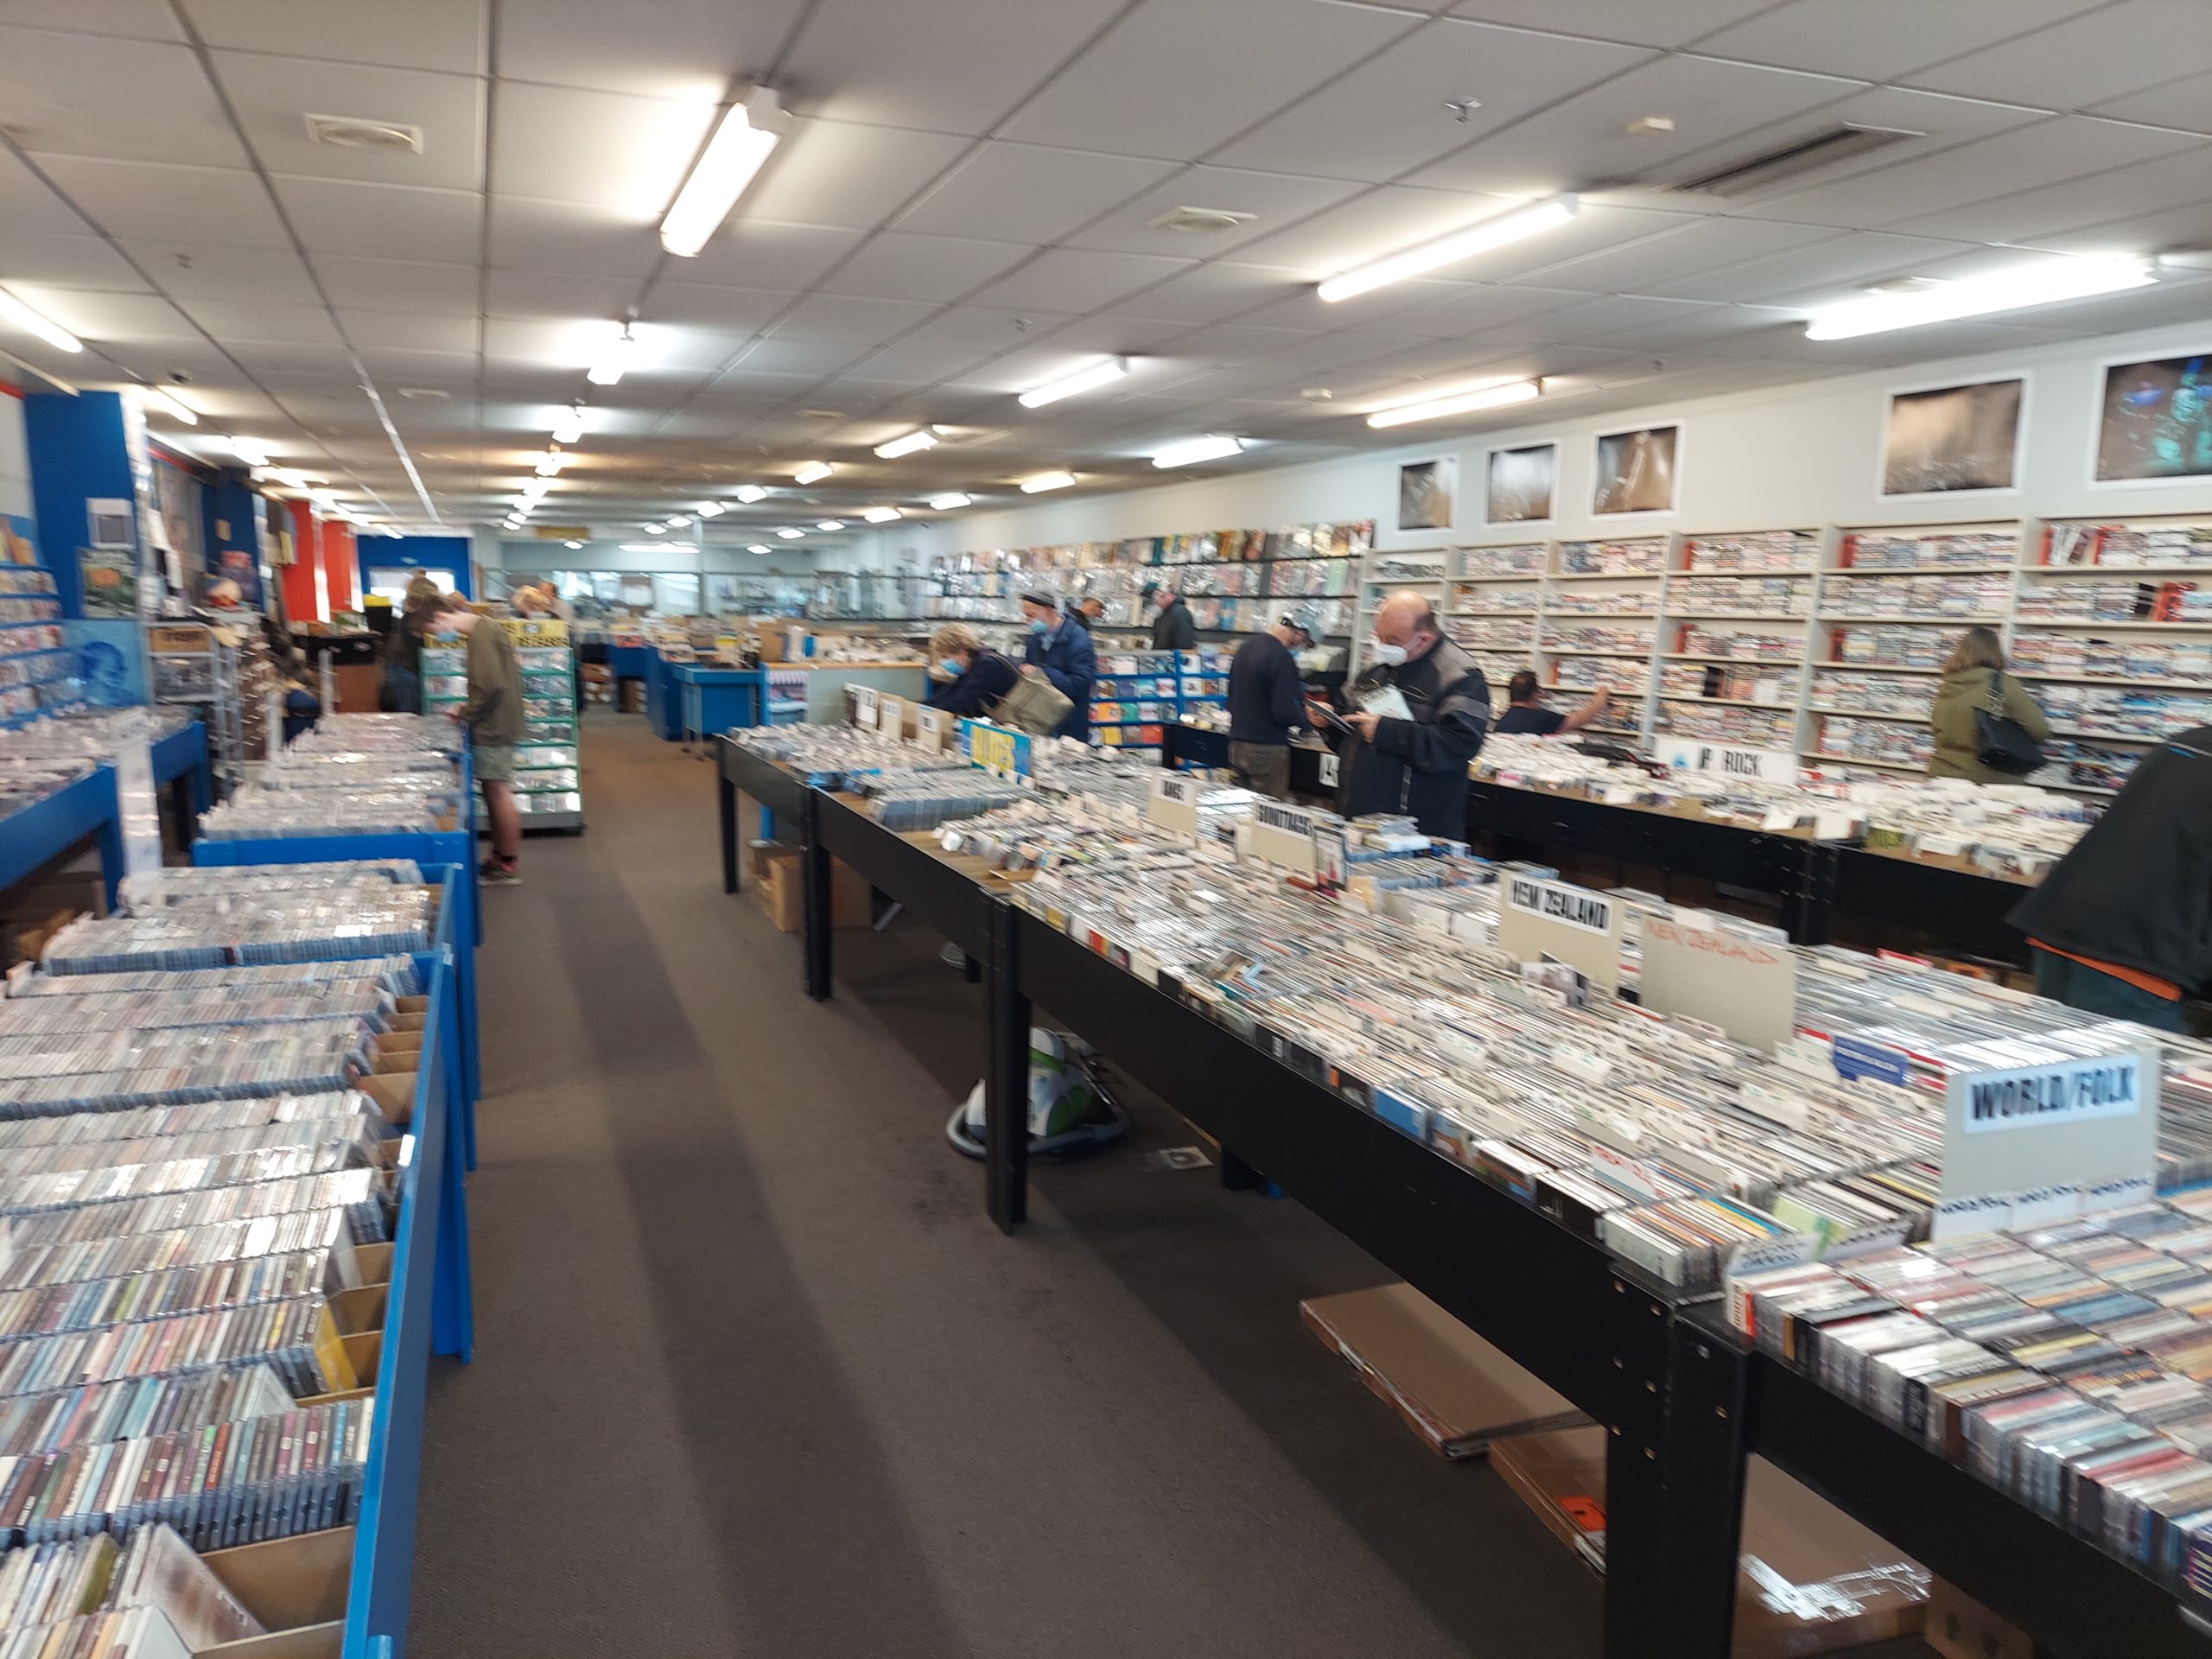 Tables filled with CDs and tables filled with LPs further in the back.